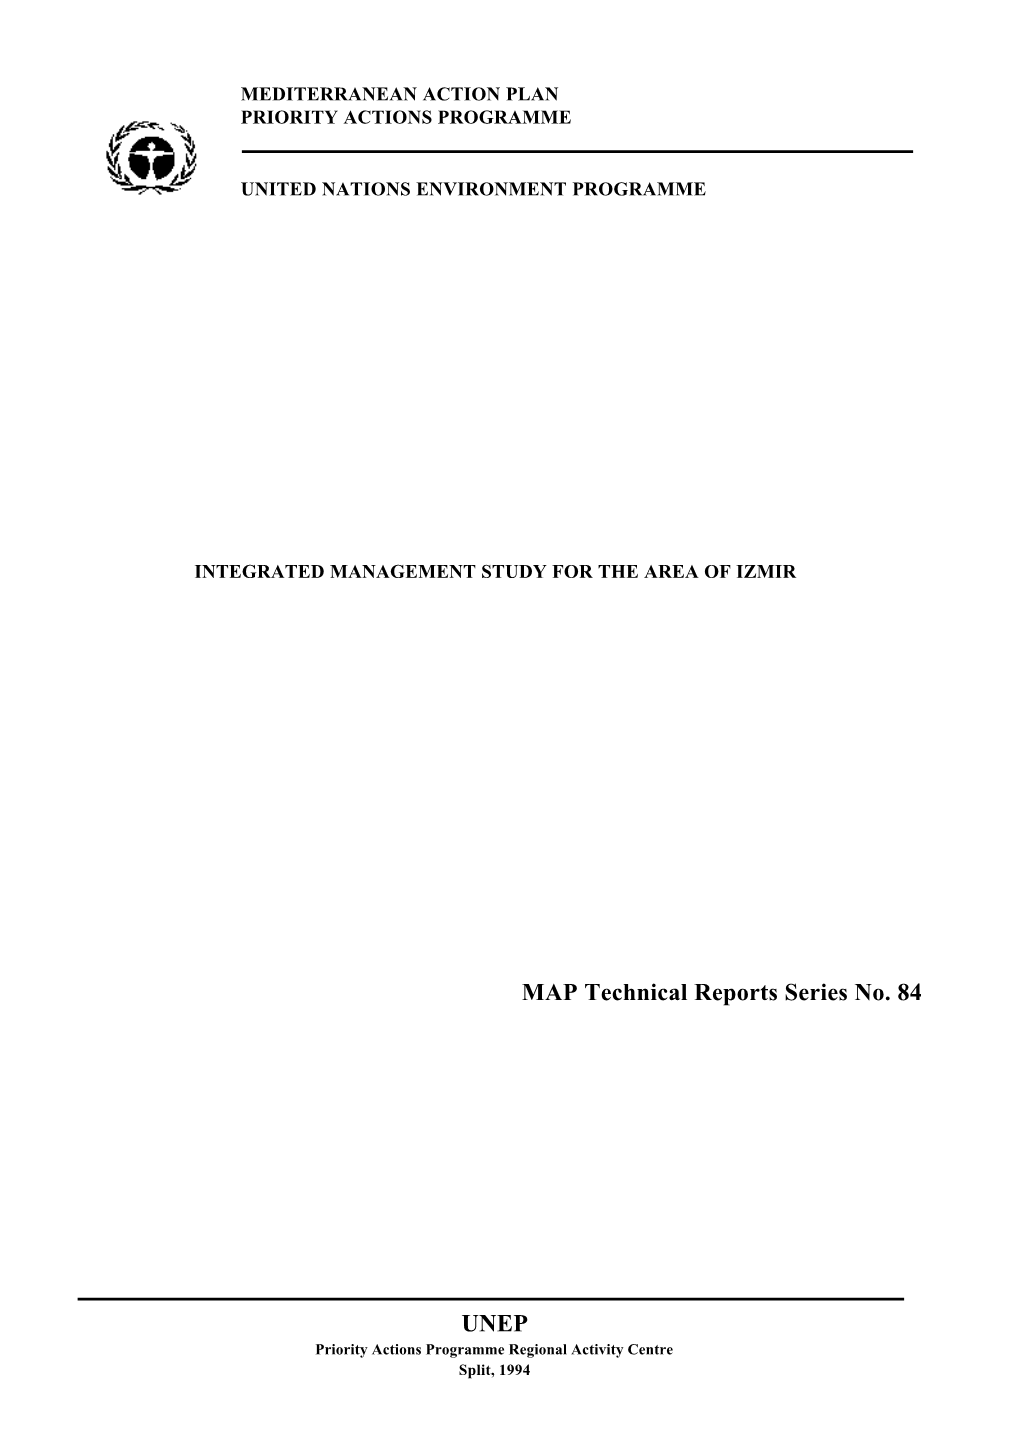 MAP Technical Reports Series No. 84 UNEP